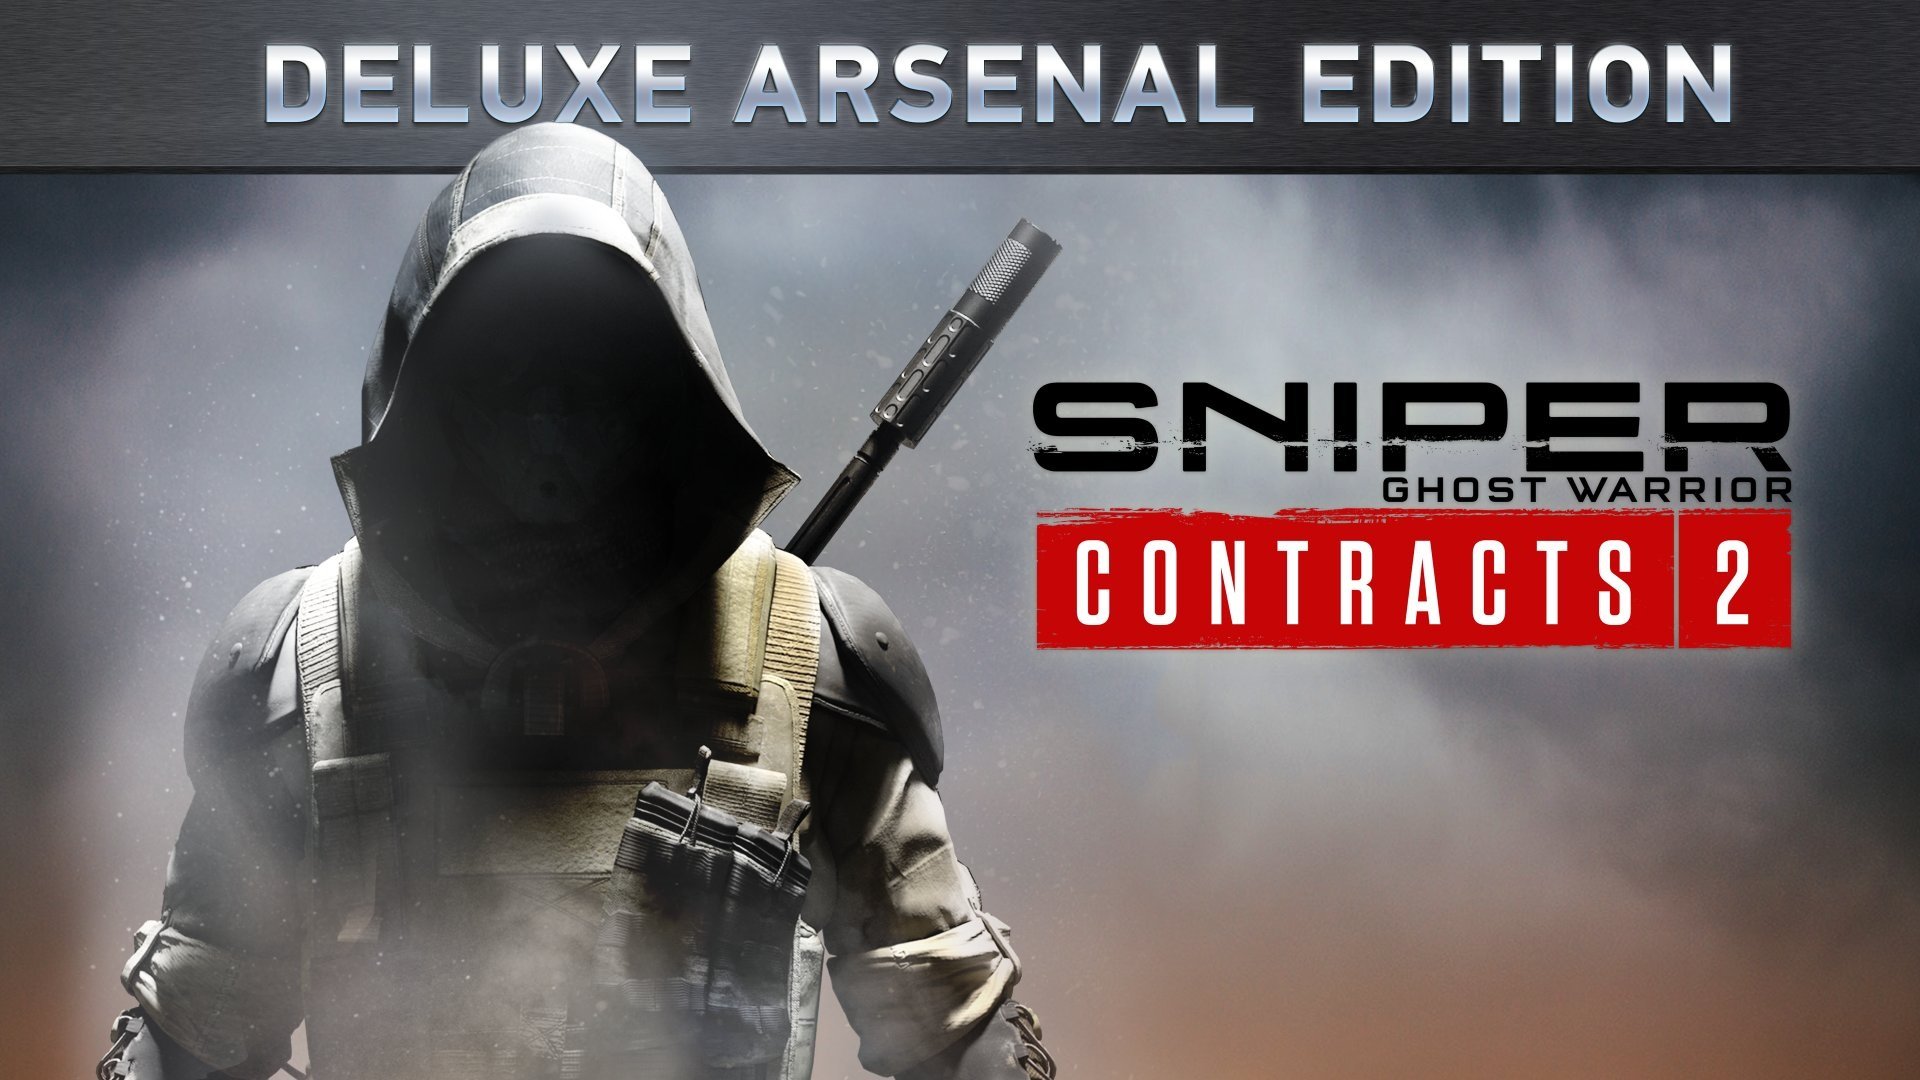 Sniper Ghost Warrior Contracts 2 Deluxe Arsenal Edition 14